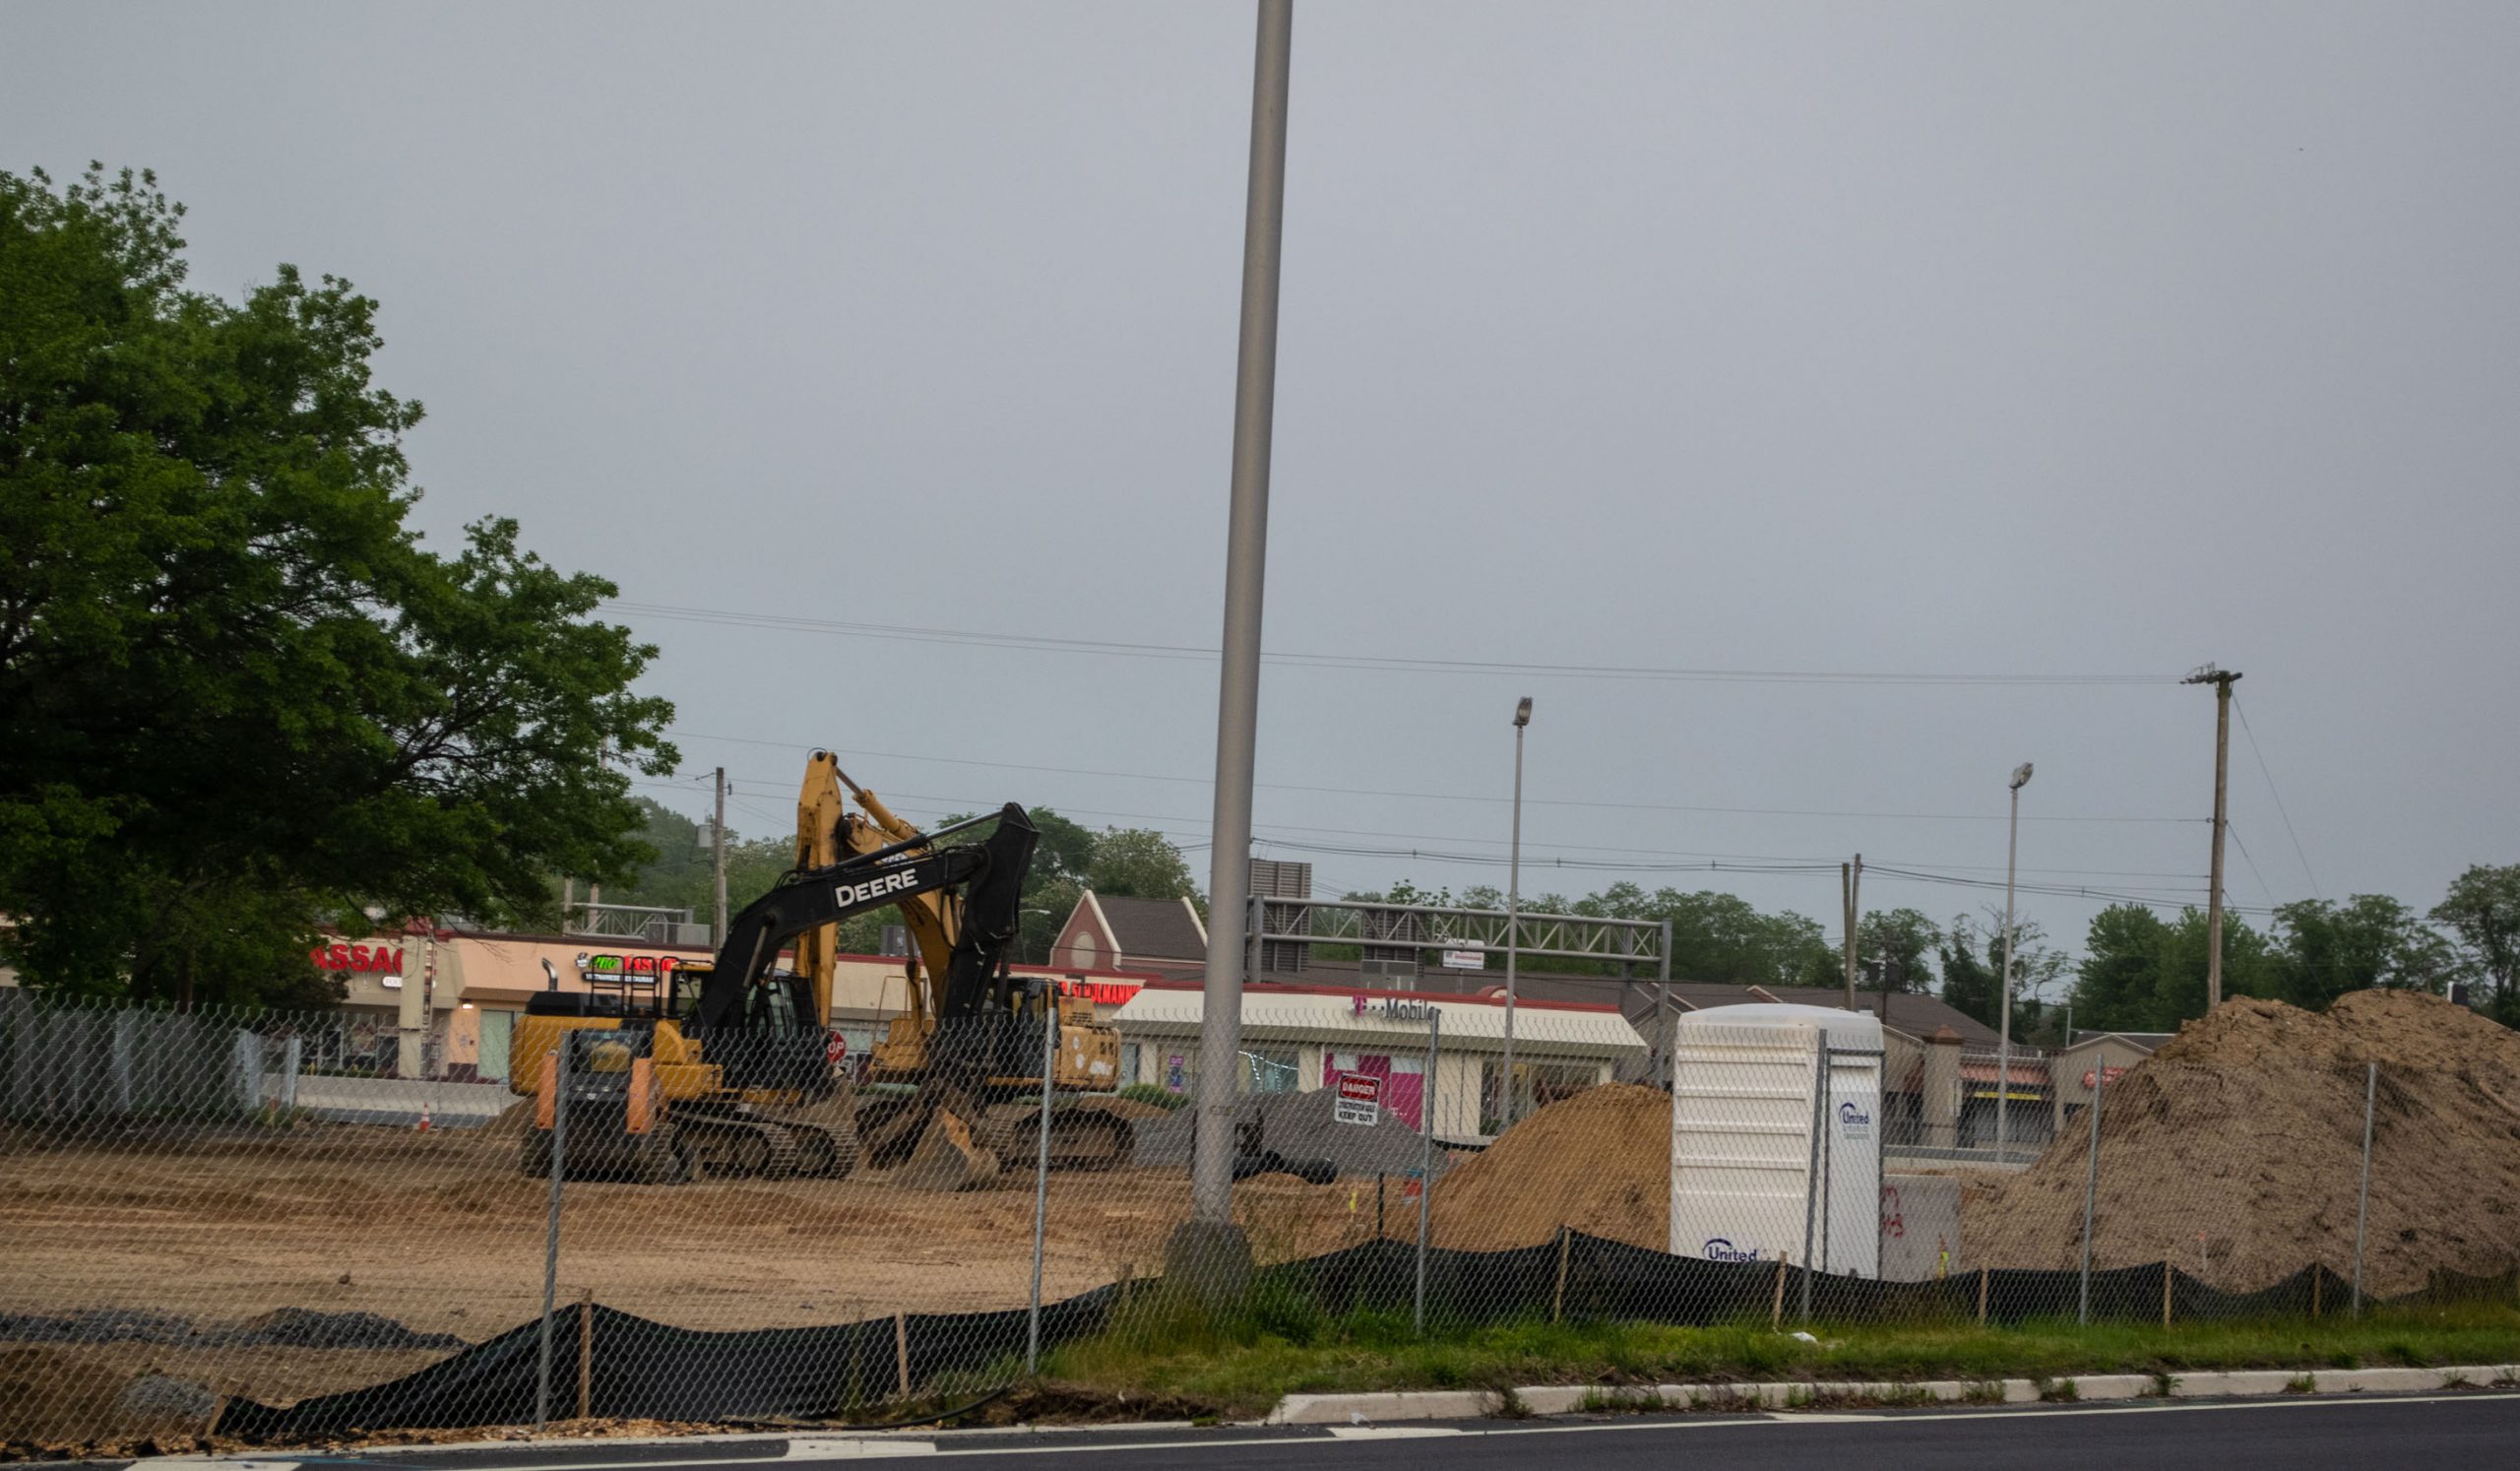 The site of the former Jersey Paddler store in Brick, May 2020. (Photo: Daniel Nee)